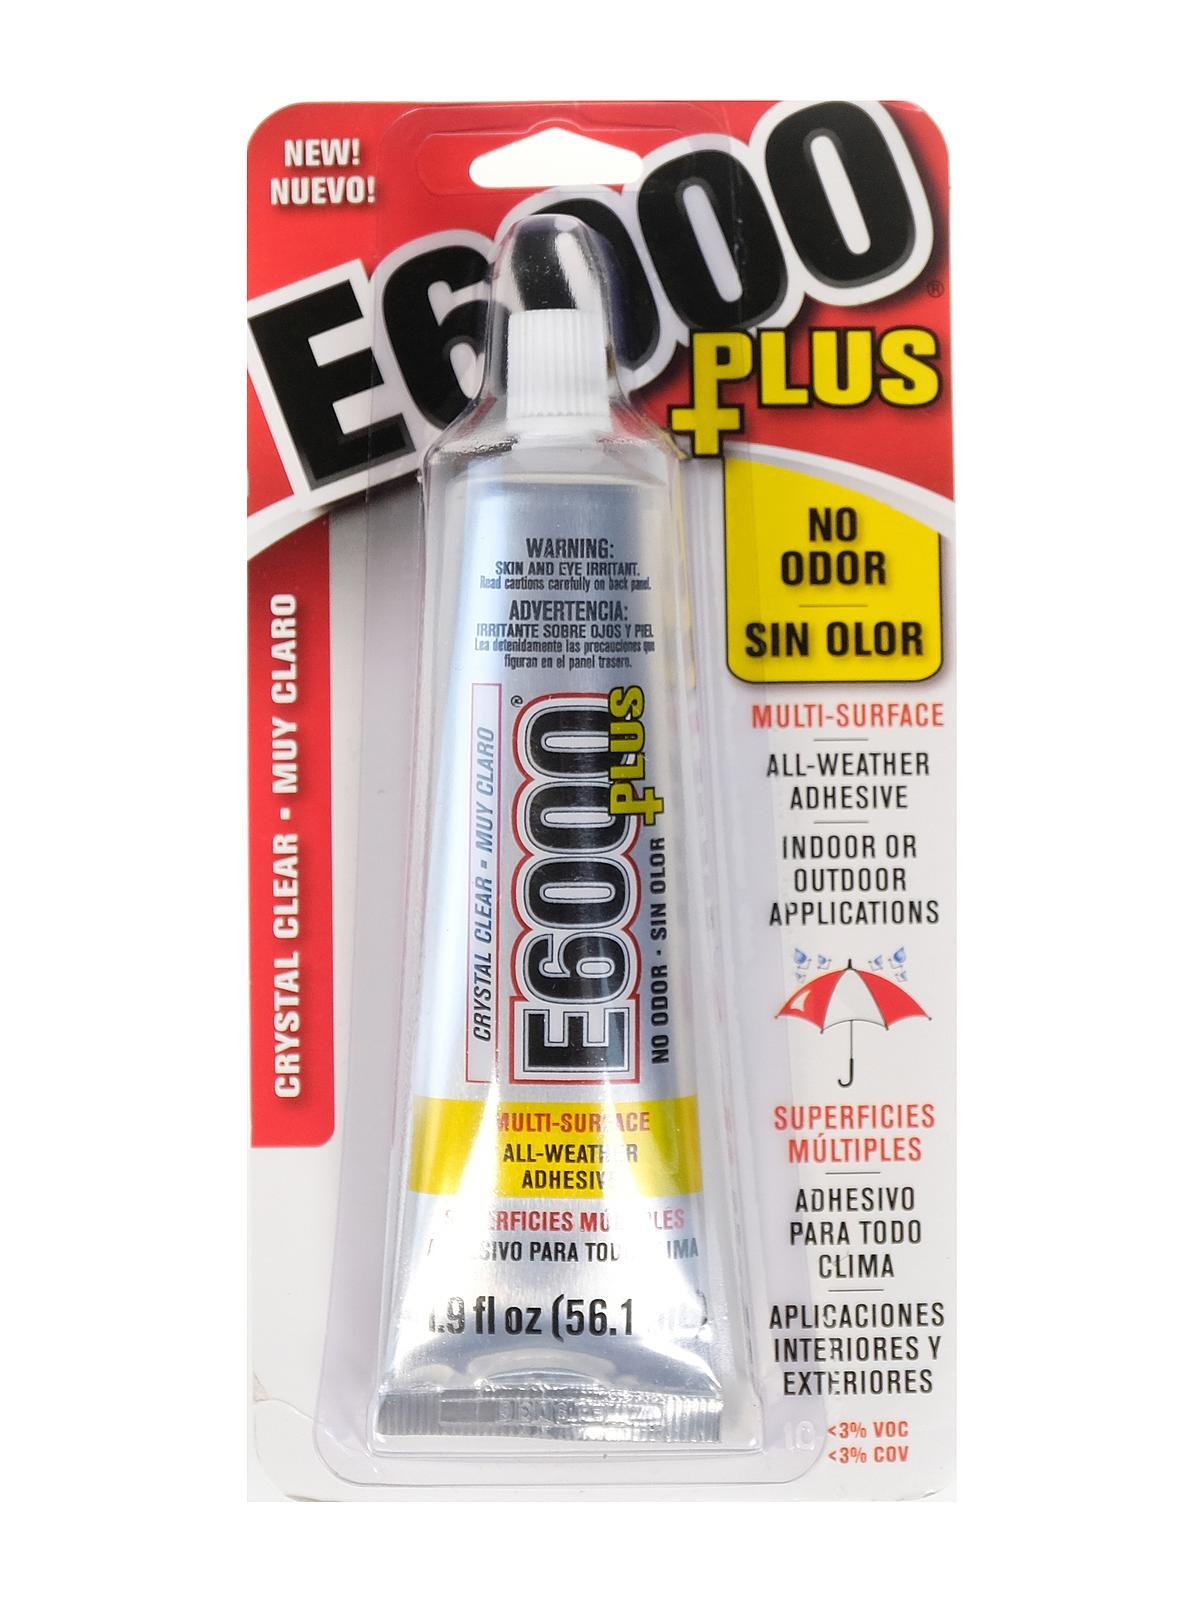 Eclectic E6000 Industrial Strength Solvent Based Adhesive Black